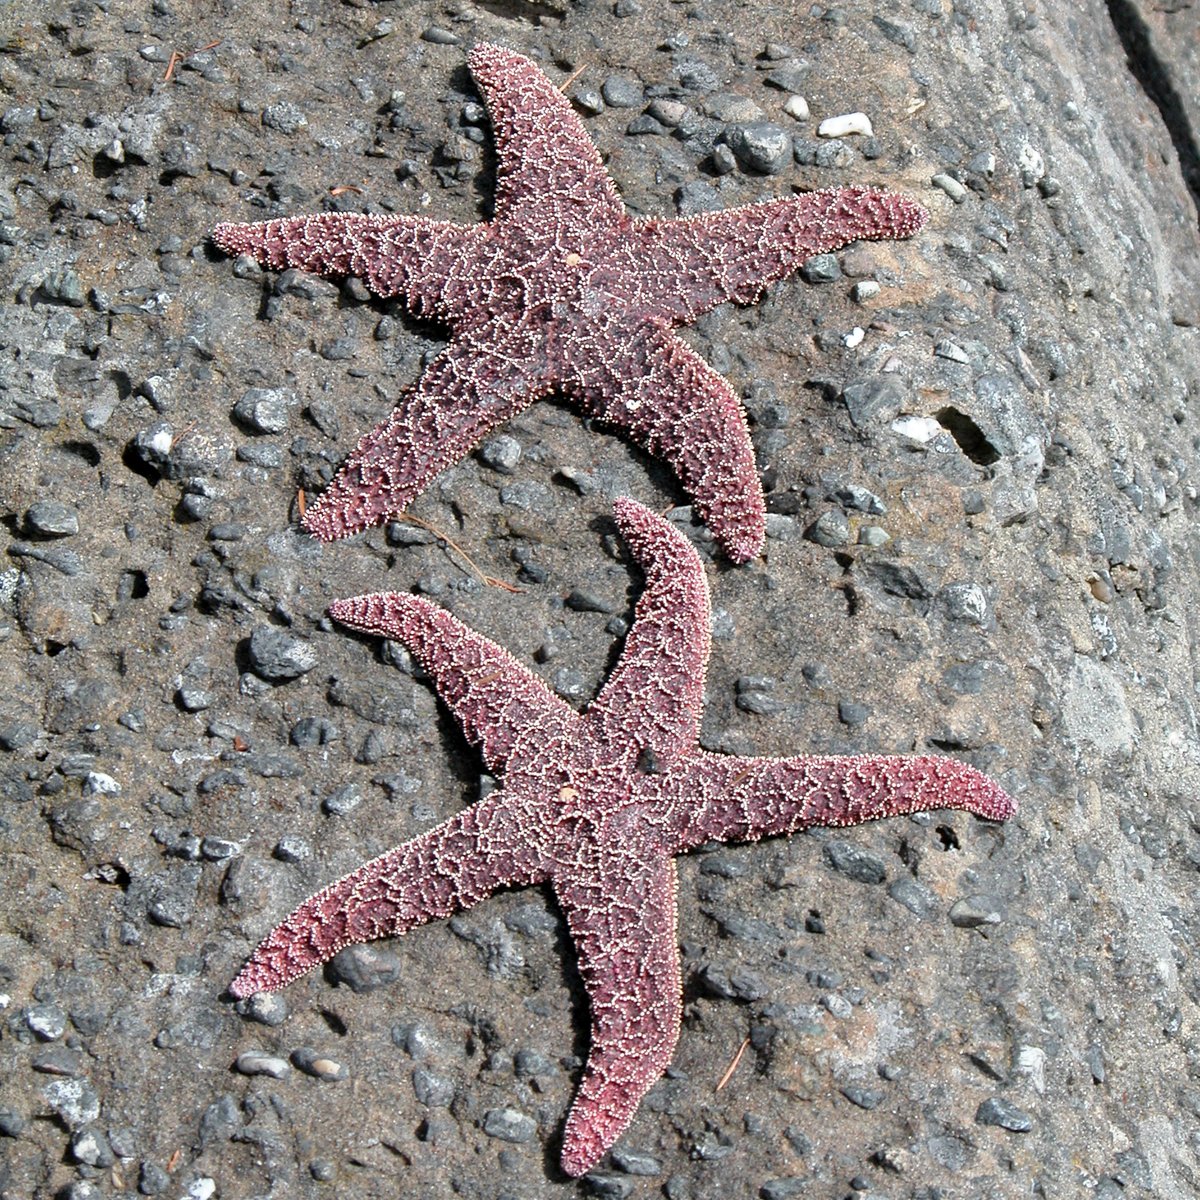 a starfish lays on the ground in the sand